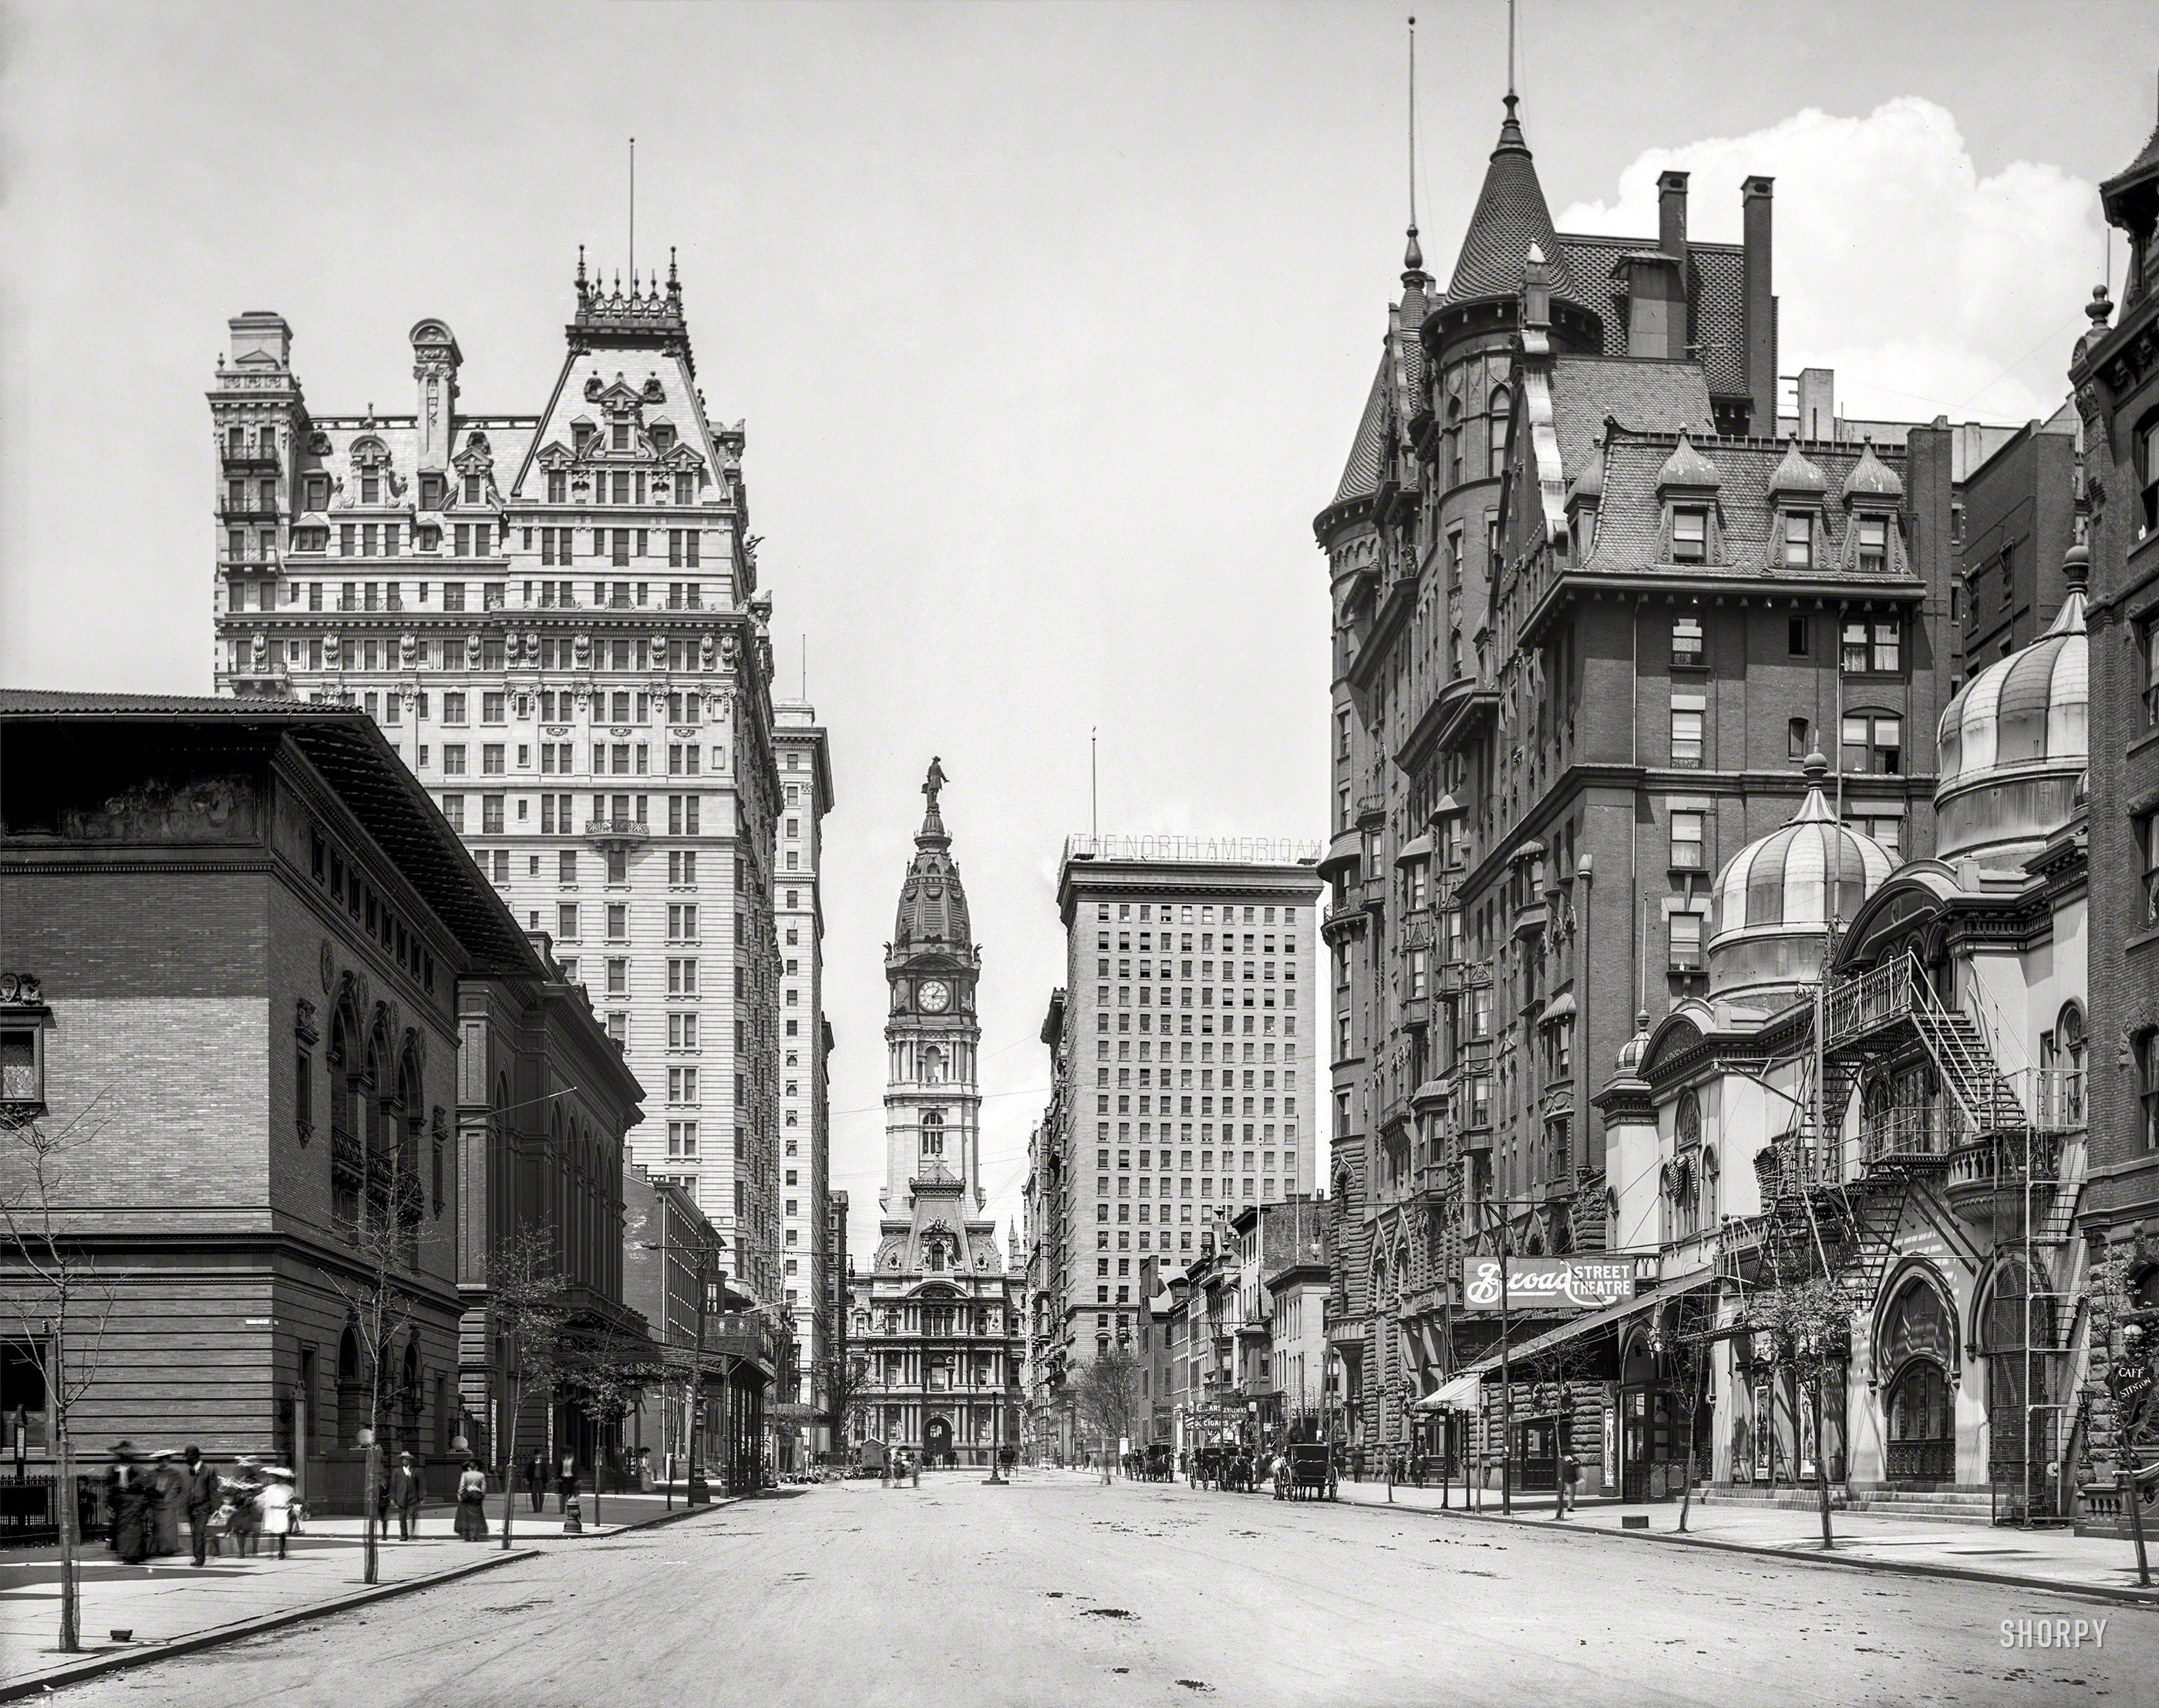 Philadelphia circa 1904. "City Hall clock tower from South Broad Street." 8x10 inch glass negative, Detroit Photographic Company. View full size.